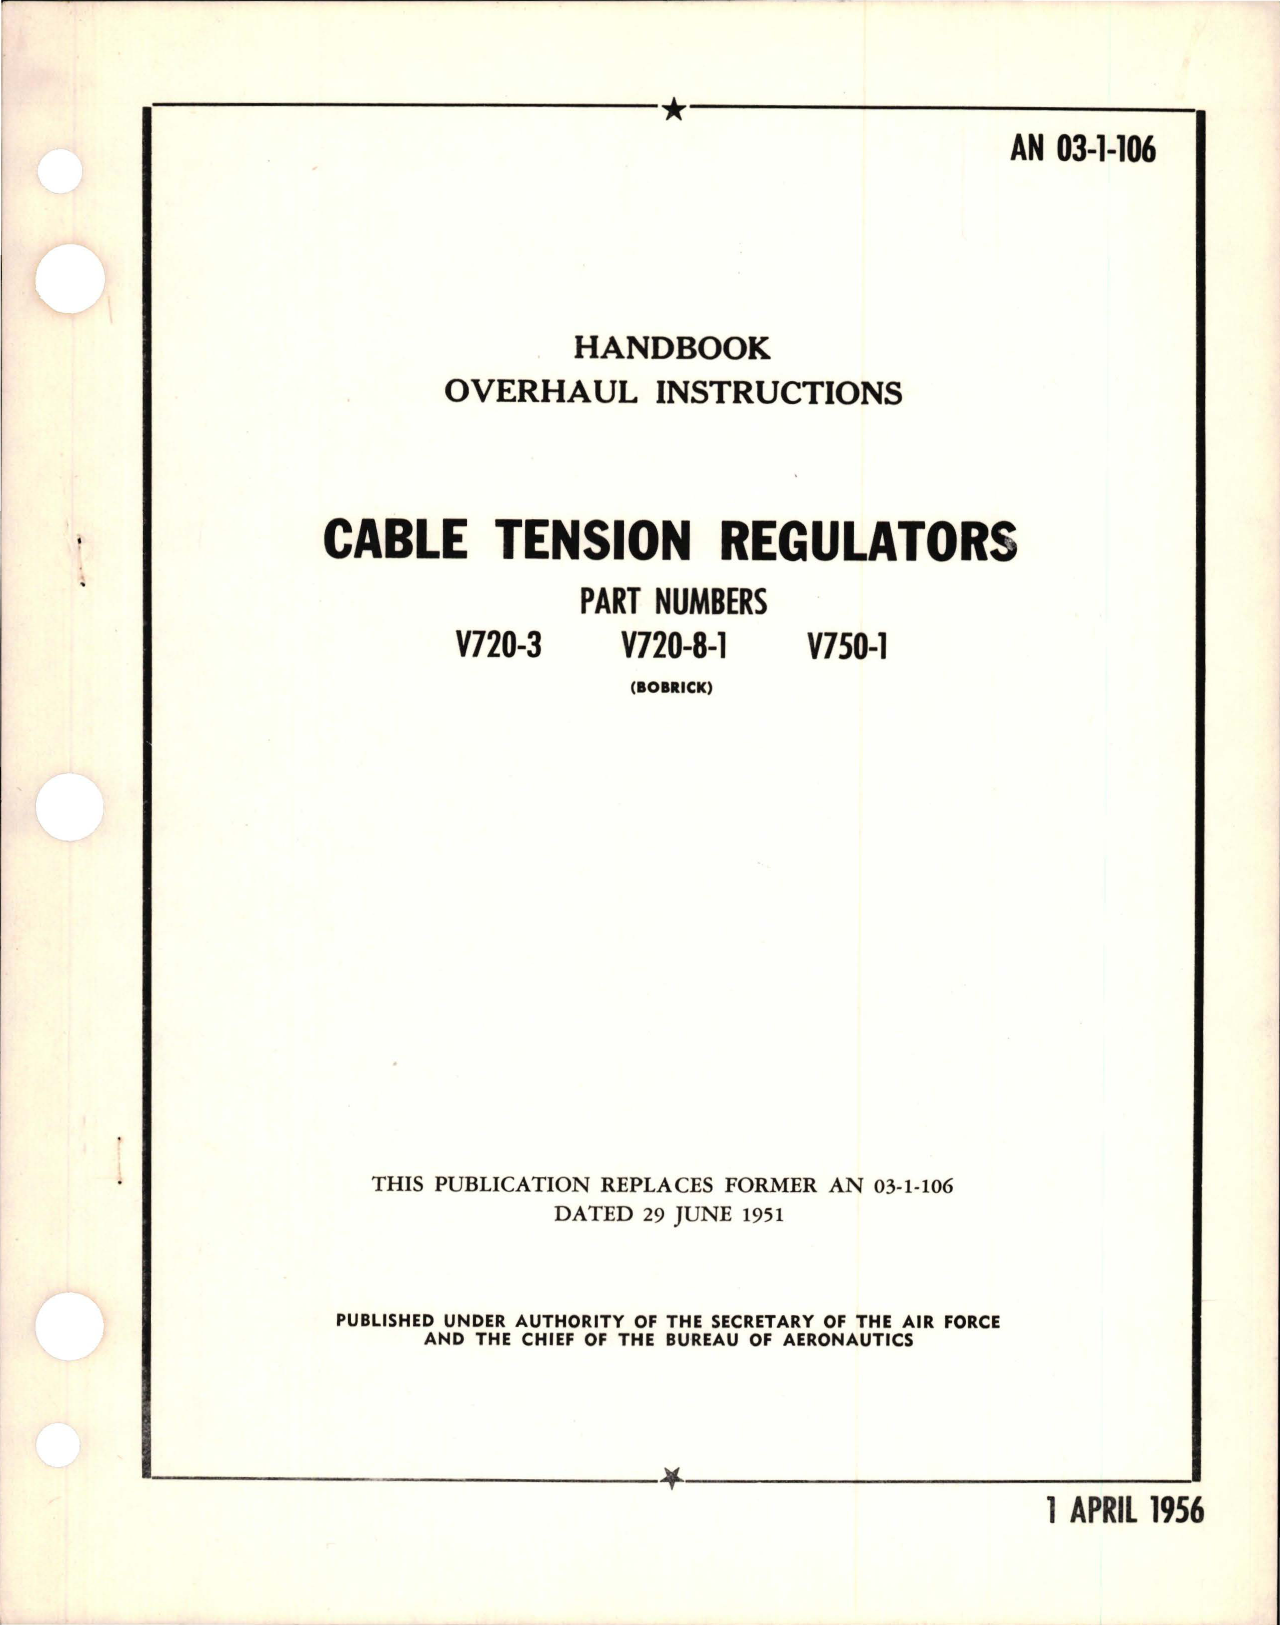 Sample page 1 from AirCorps Library document: Overhaul Instructions for Cable Tension Regulators - V720-3, V720-8-1, and V750-1